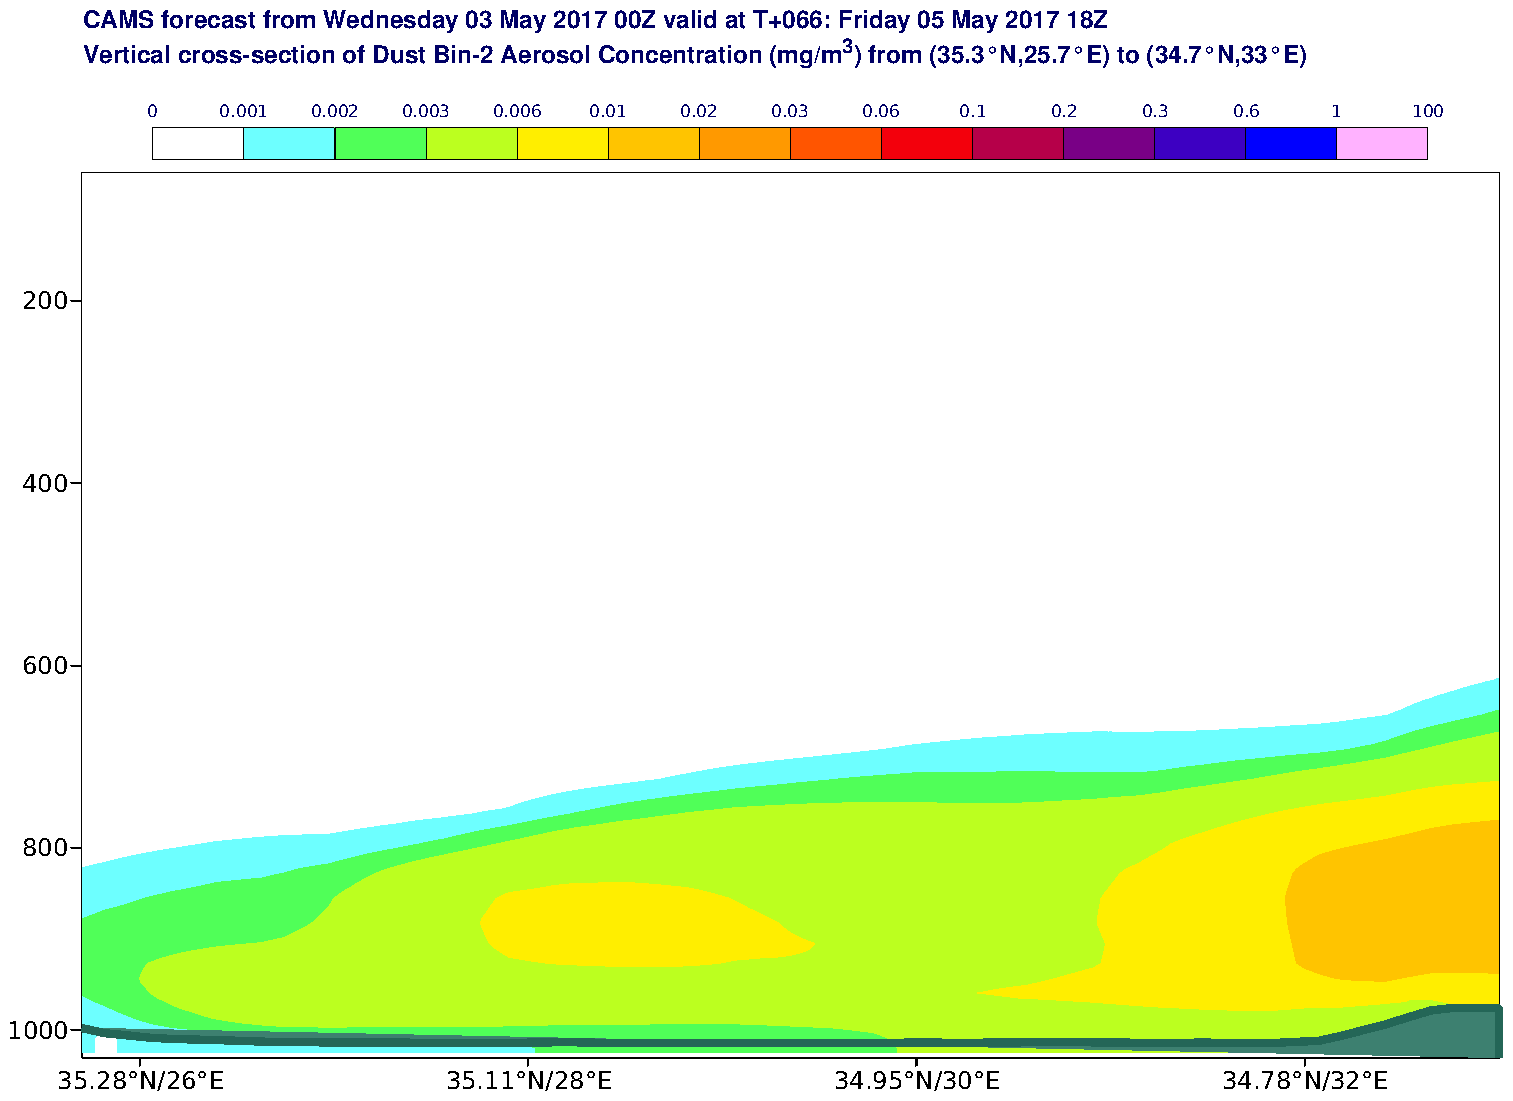 Vertical cross-section of Dust Bin-2 Aerosol Concentration (mg/m3) valid at T66 - 2017-05-05 18:00